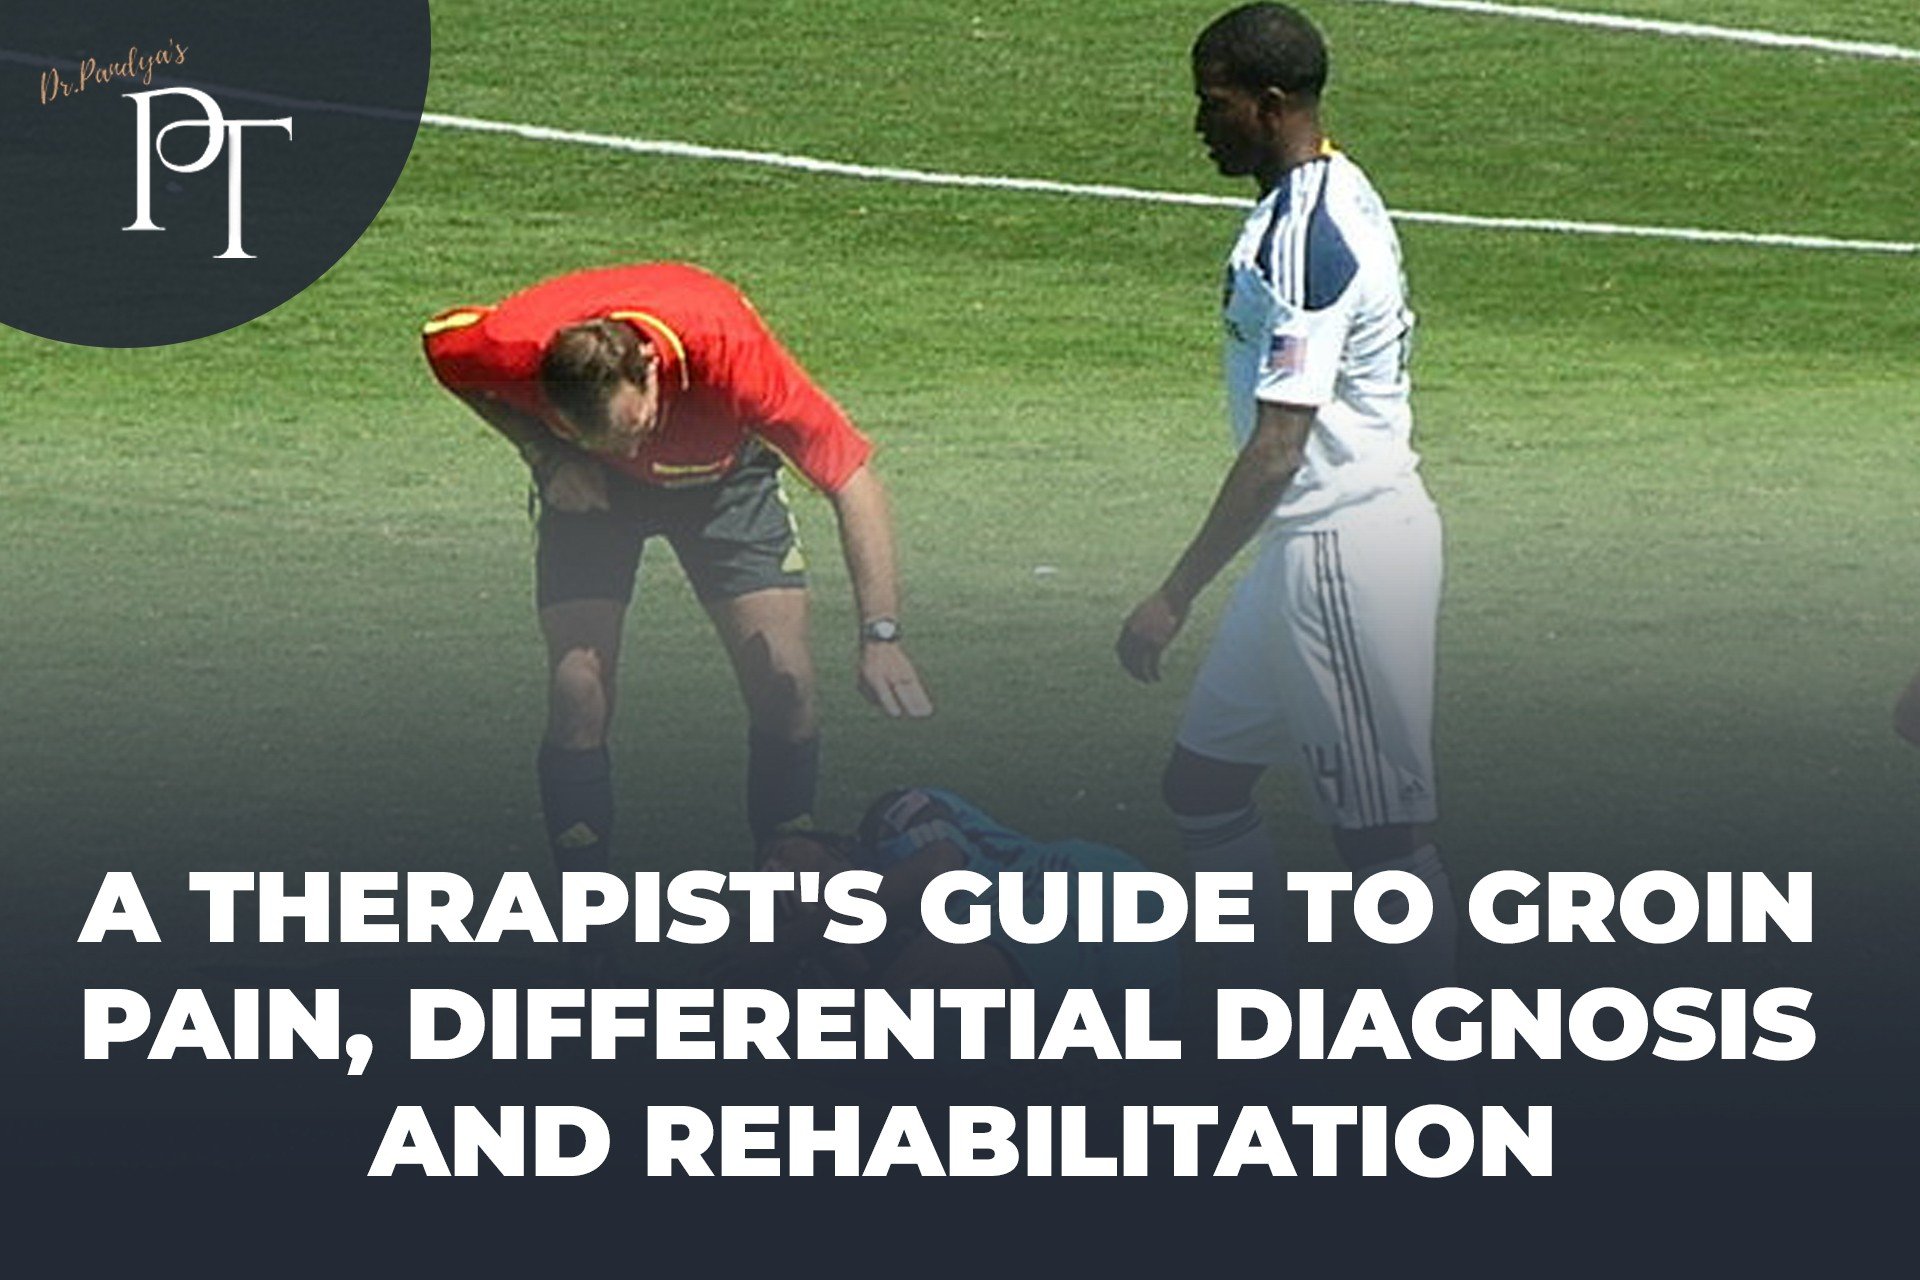 A Therapist's guide to Groin Pain, Differential Diagnosis and Rehabilitation